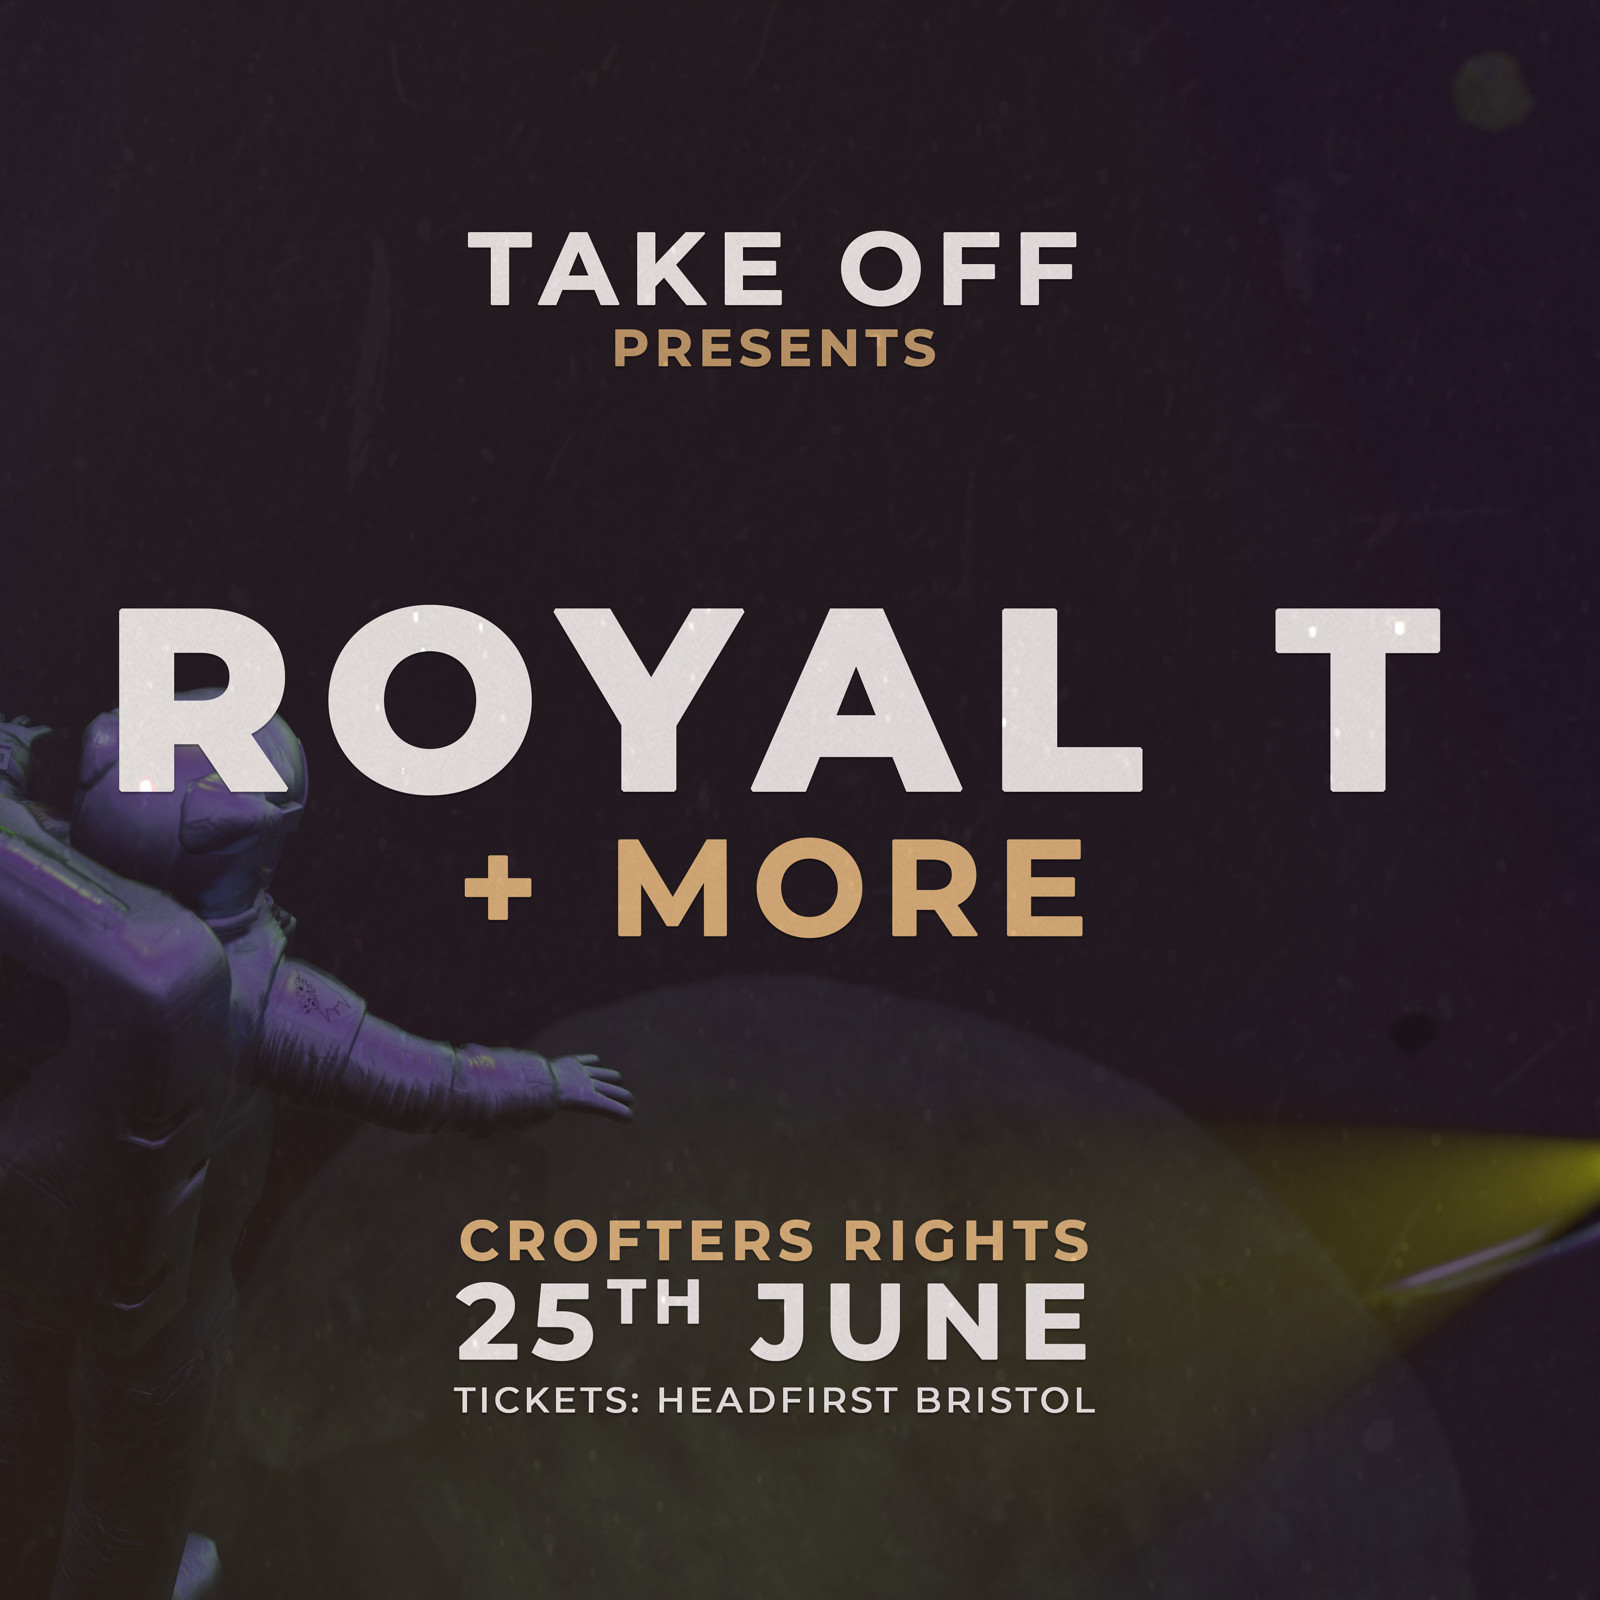 Take Off Present: Royal T + More at Crofters Rights